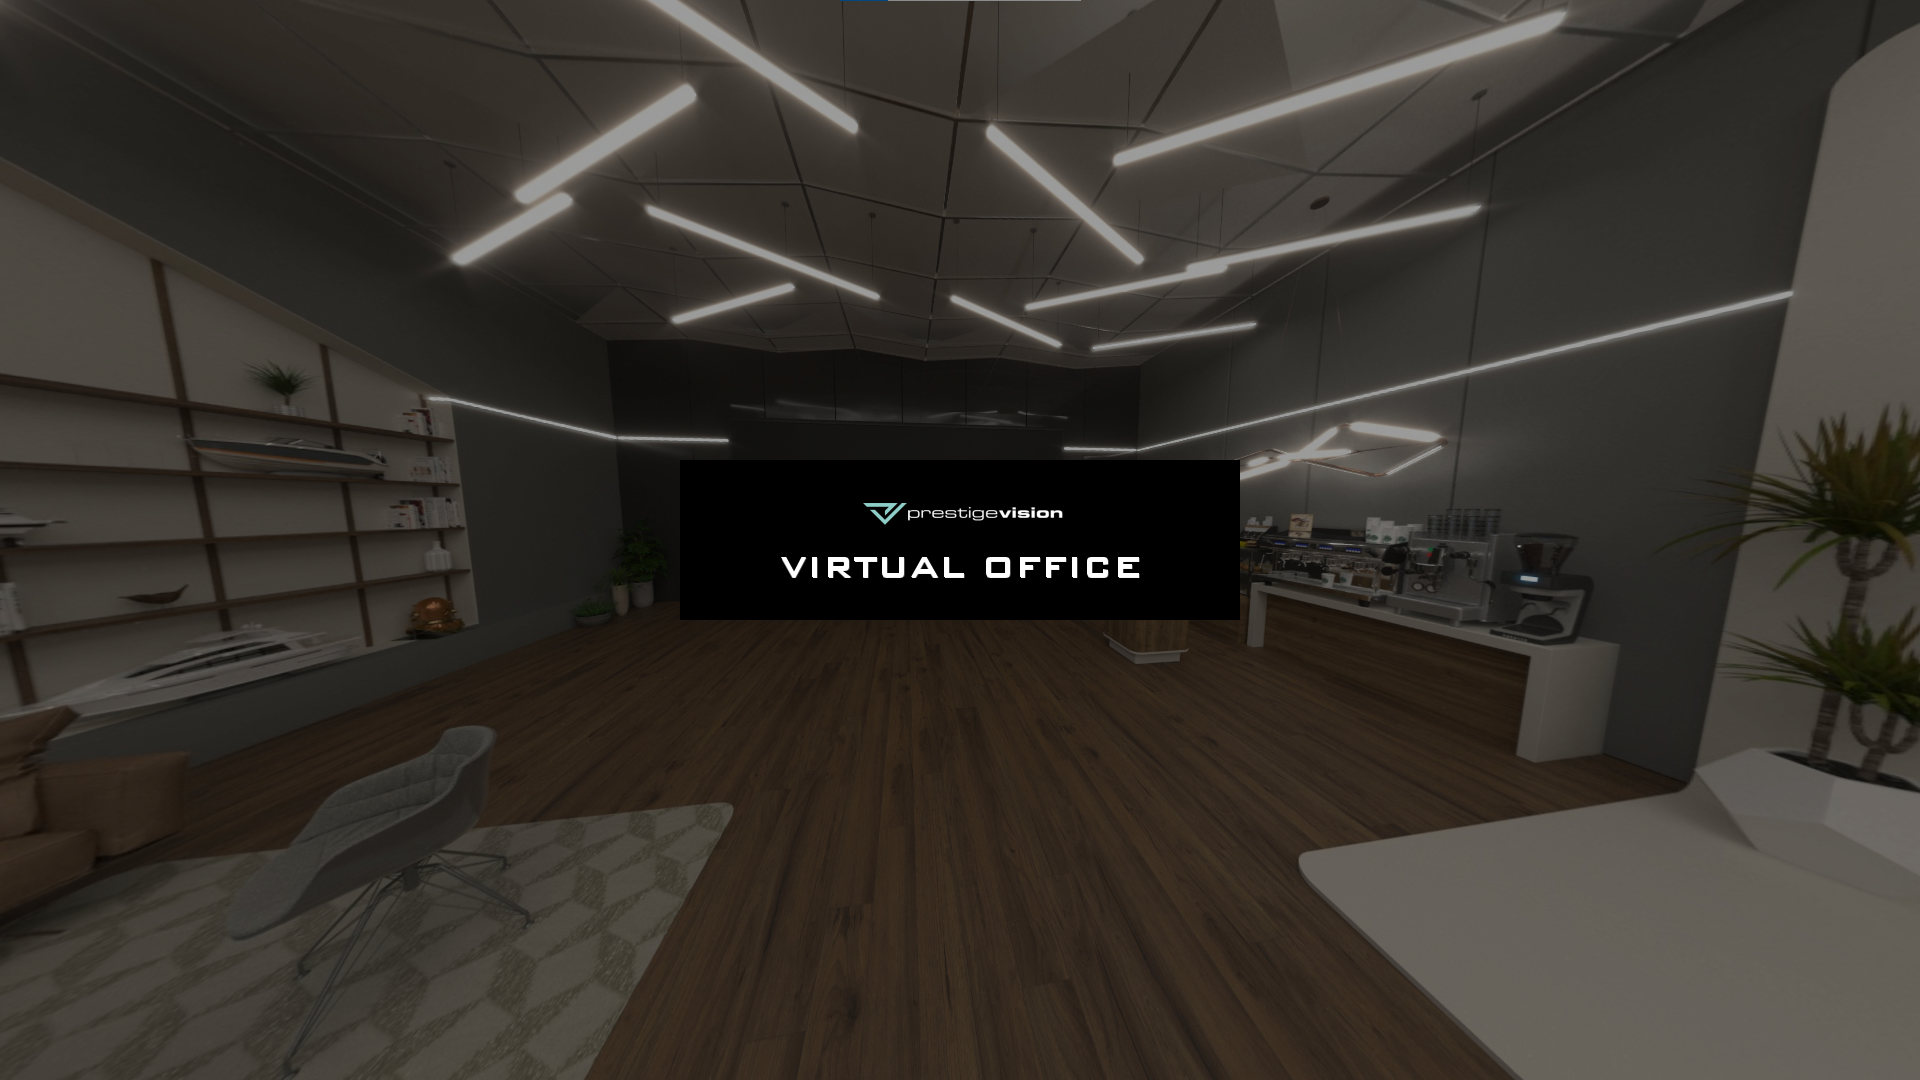 360 VR Virtual Tours of the Prestige Vision Virtual Office